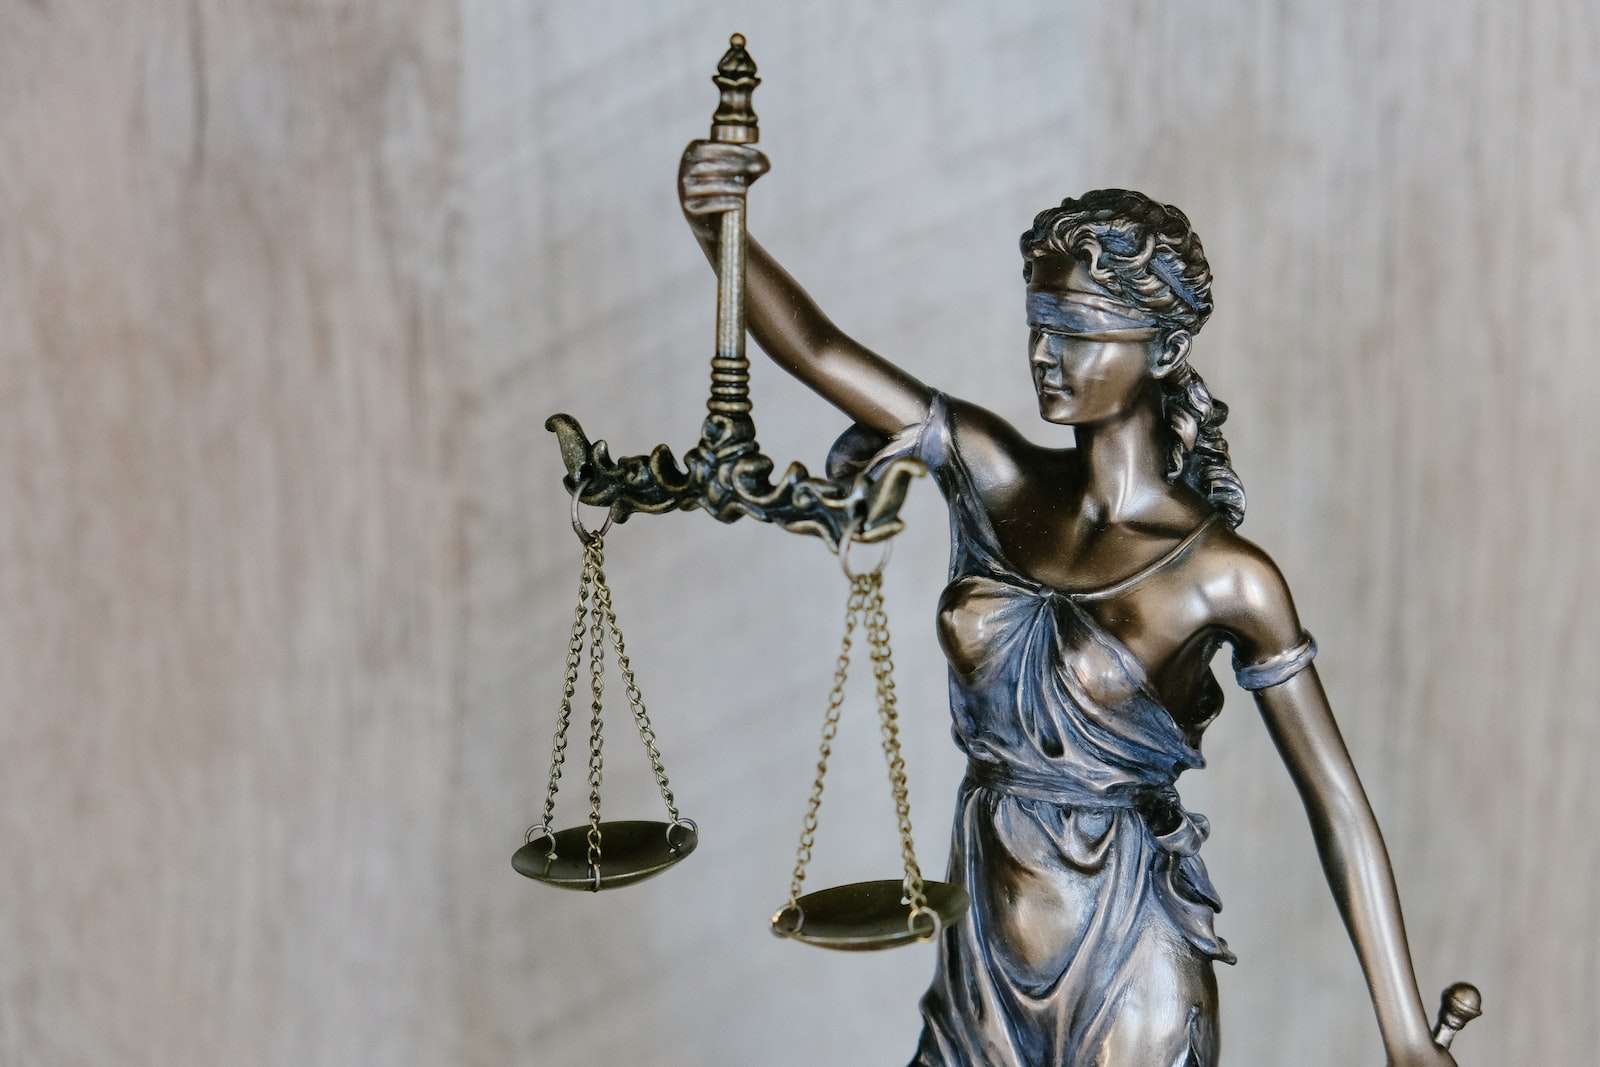 This is an image of a balance that is used to show fairness in the law system.